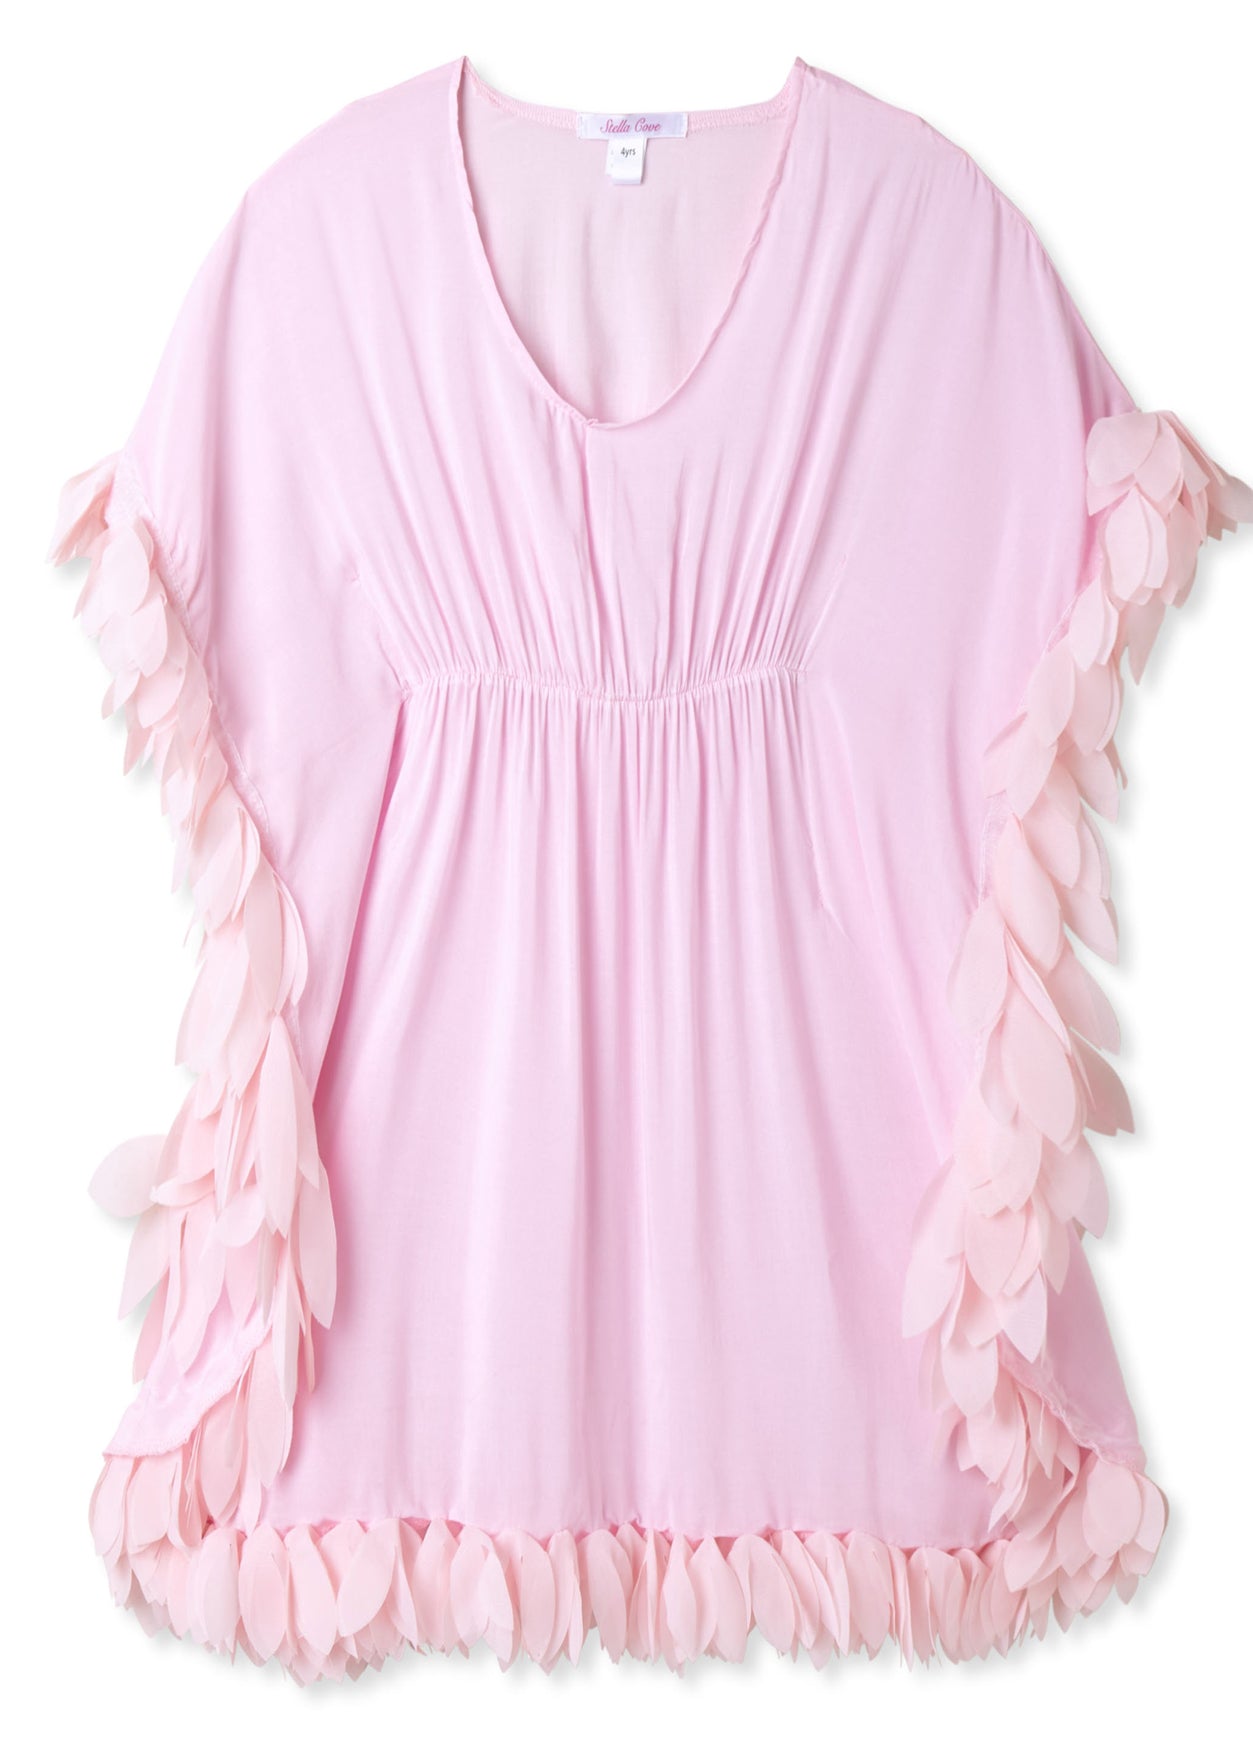 pink beach cover-ups for girls